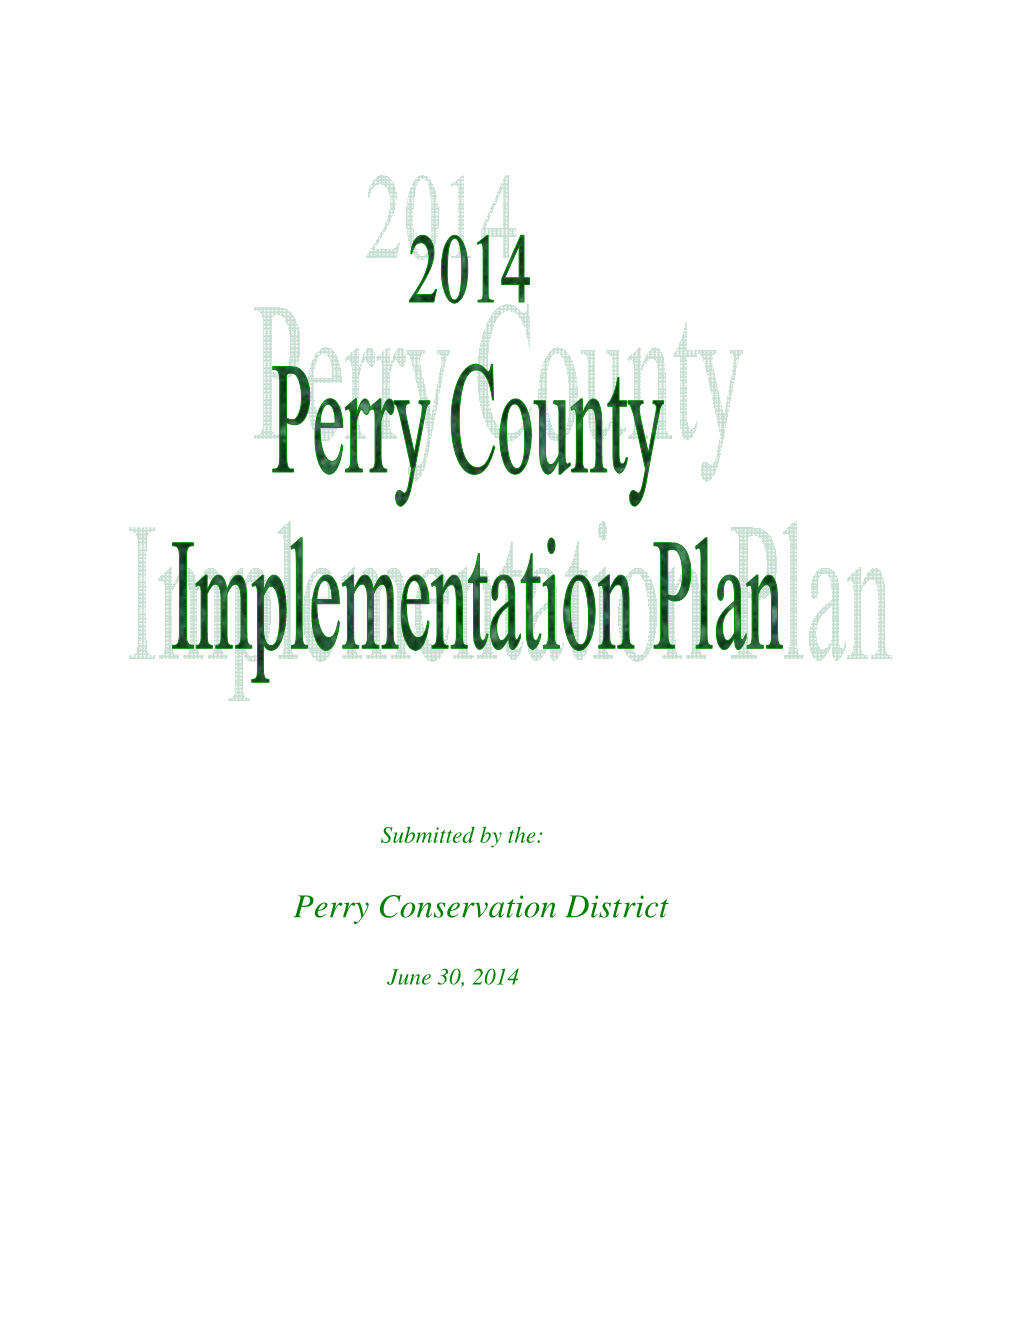 Perry Conservation District